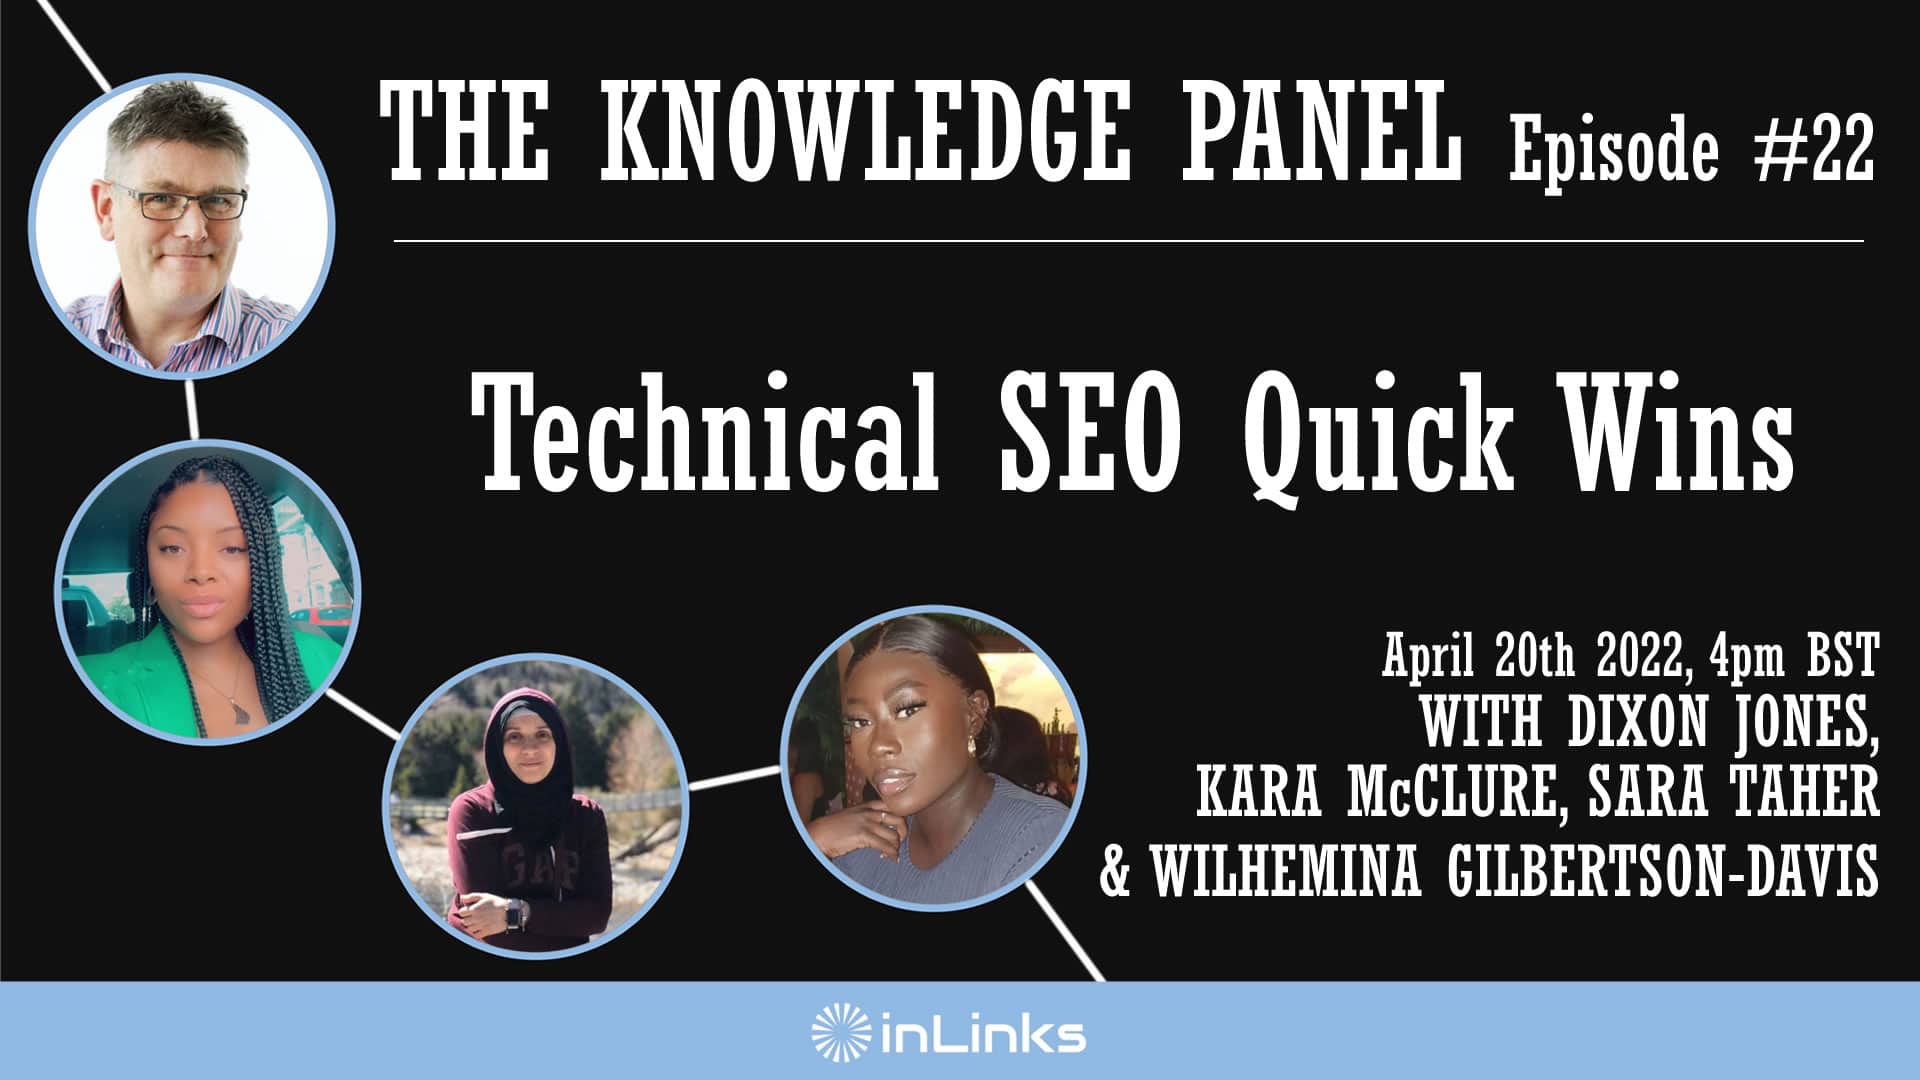 The Knowledge Panel Episode 22: Technical SEO Quick Wins